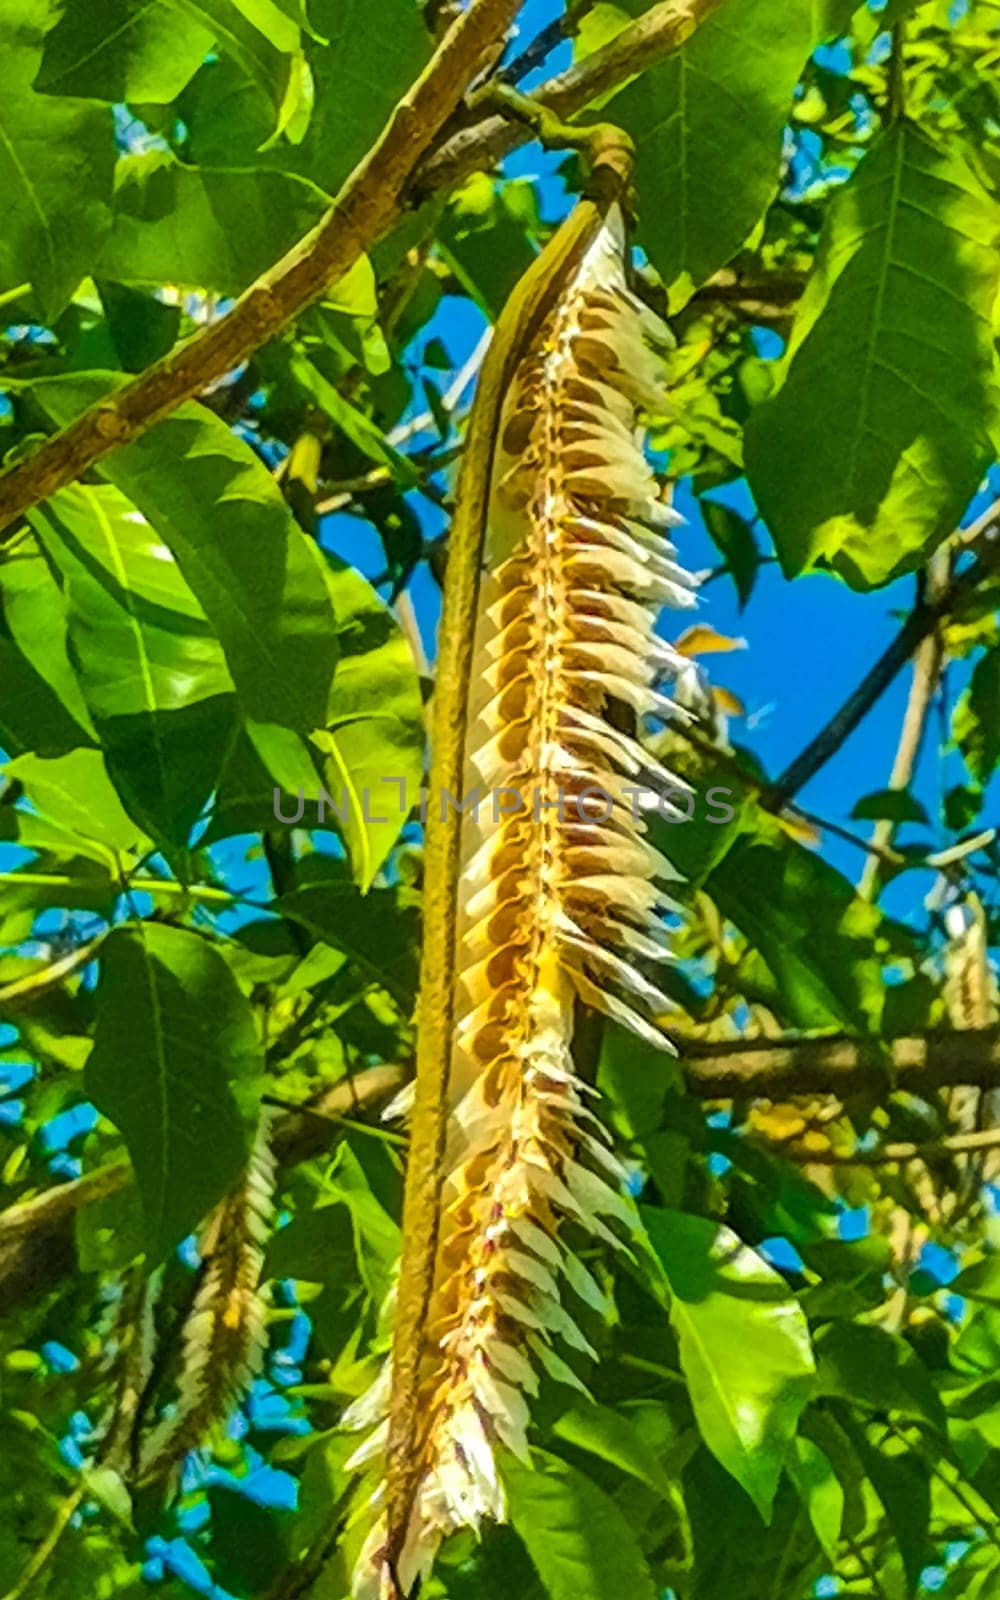 Tropical pods hanging from the tree Seeds in Mexico. by Arkadij